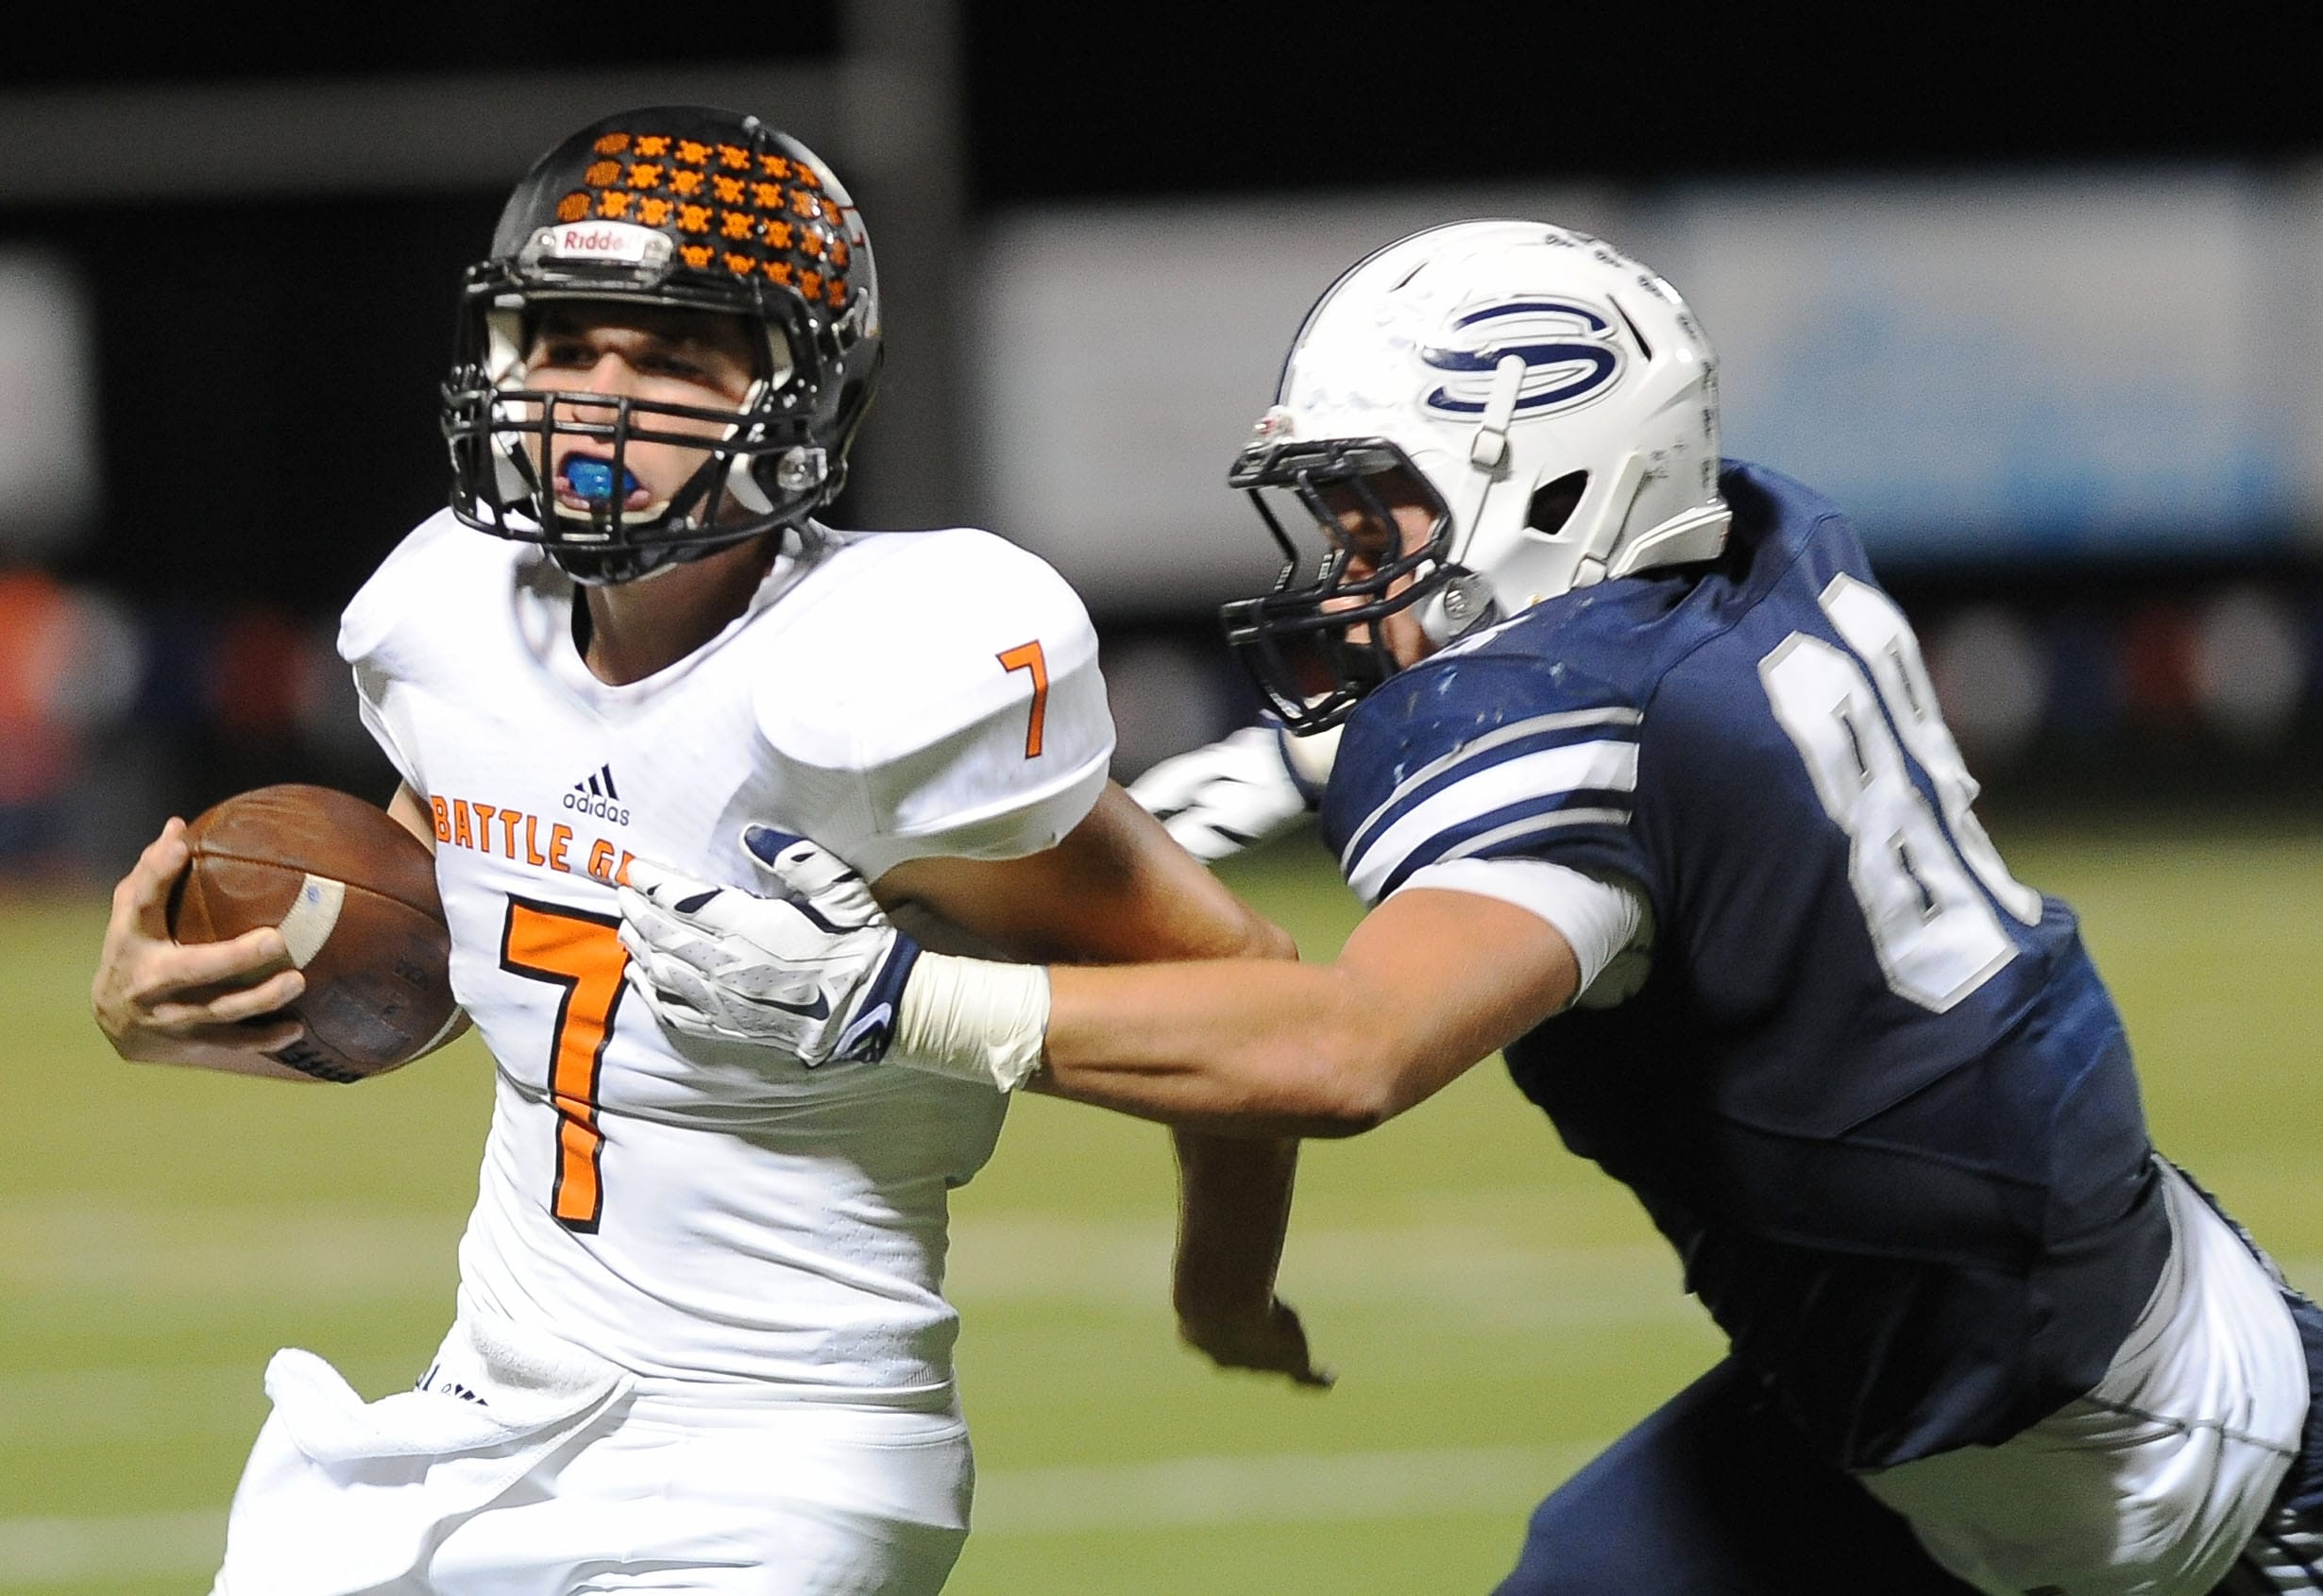 Gunner Talkington of Battle Ground is pursued by  Skyview's Skyler Martin at a game at the Kiggens Bowl in Vancouver, Friday September 17, 2015.